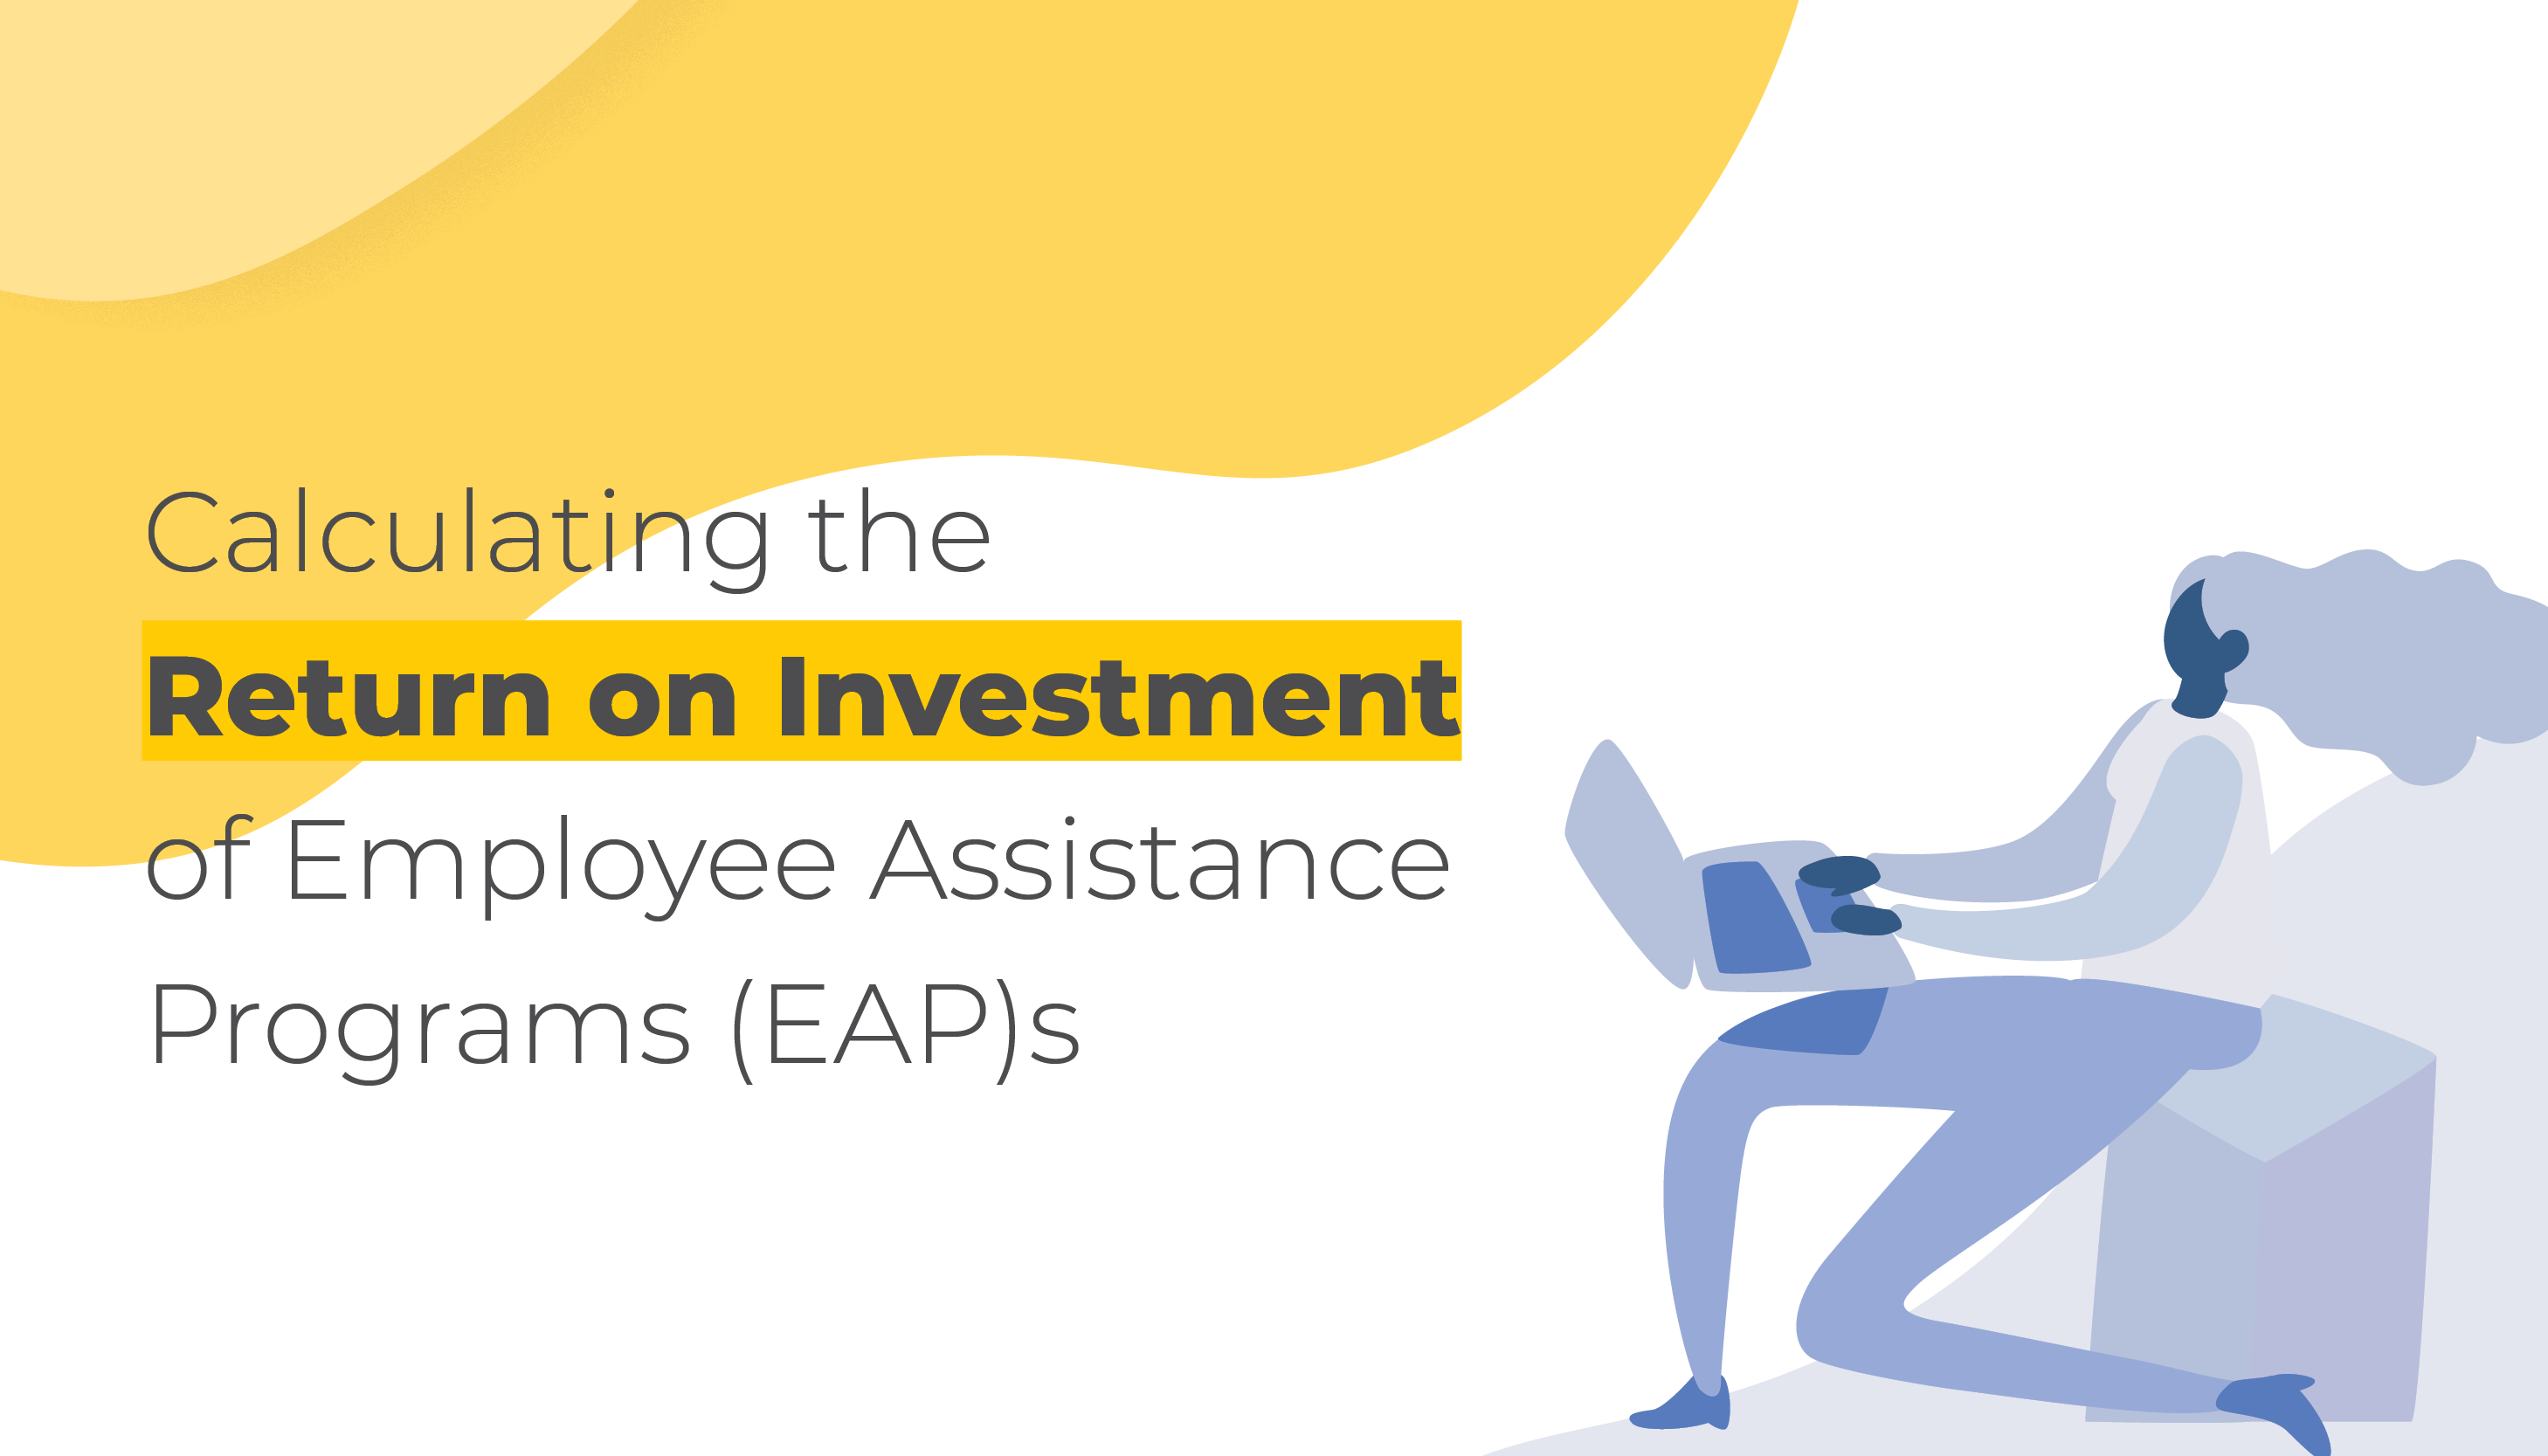 Calculating the Return on Investment of Employee Assistance Programs (EAP)s | Benefits by Design